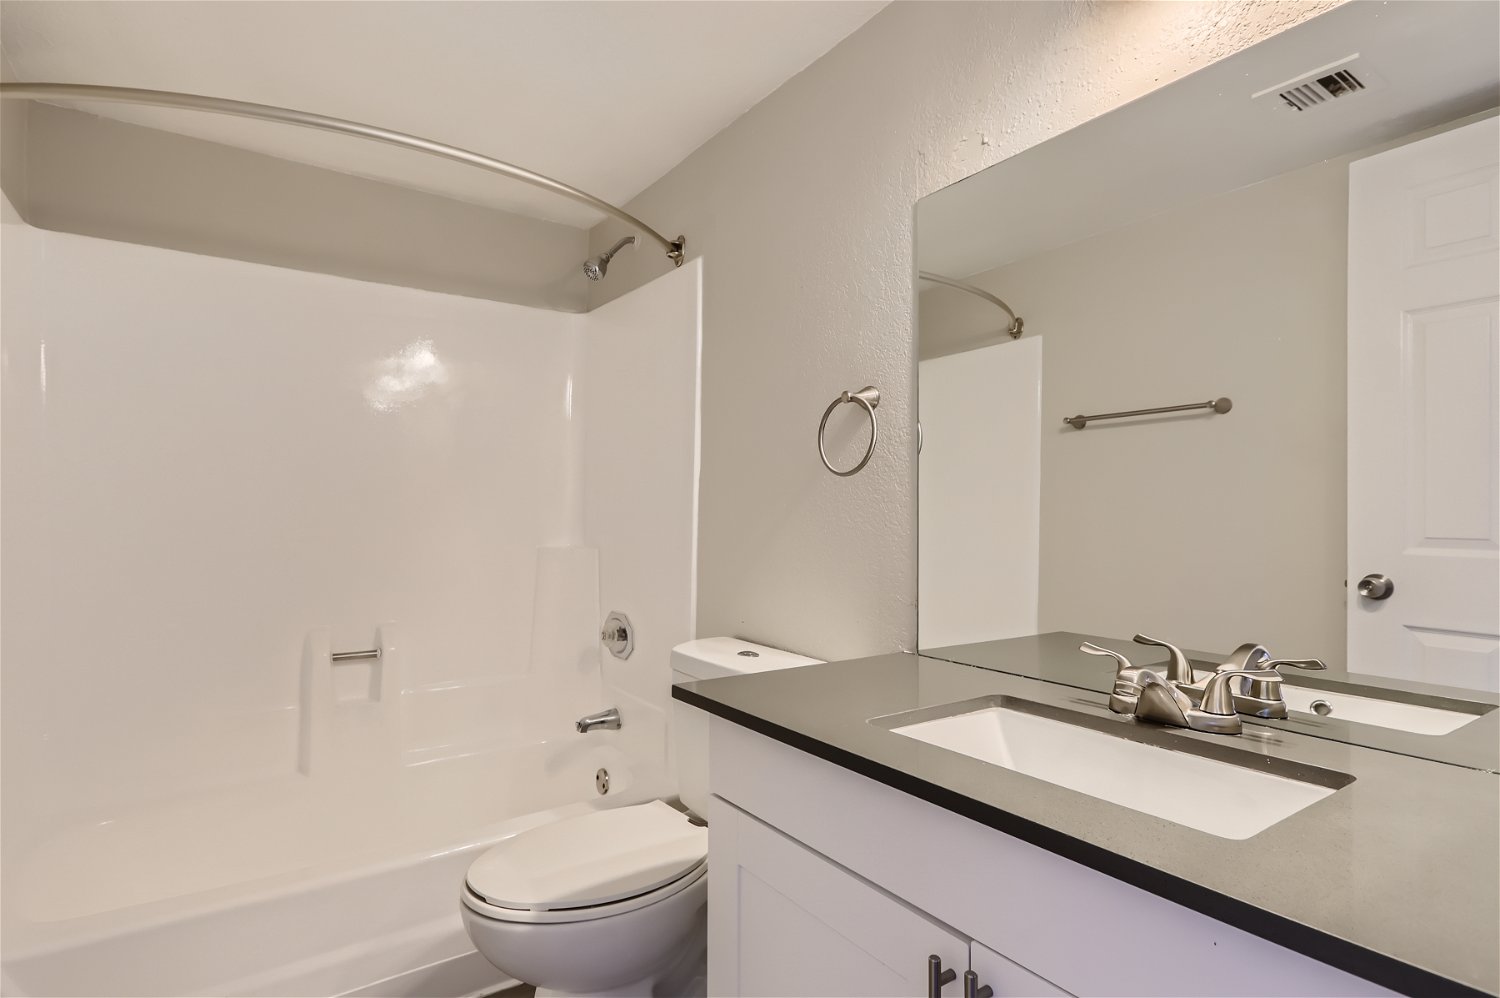 A remodeled bathroom with a tub, quartz vanity, and a mirror at Rise Trailside.